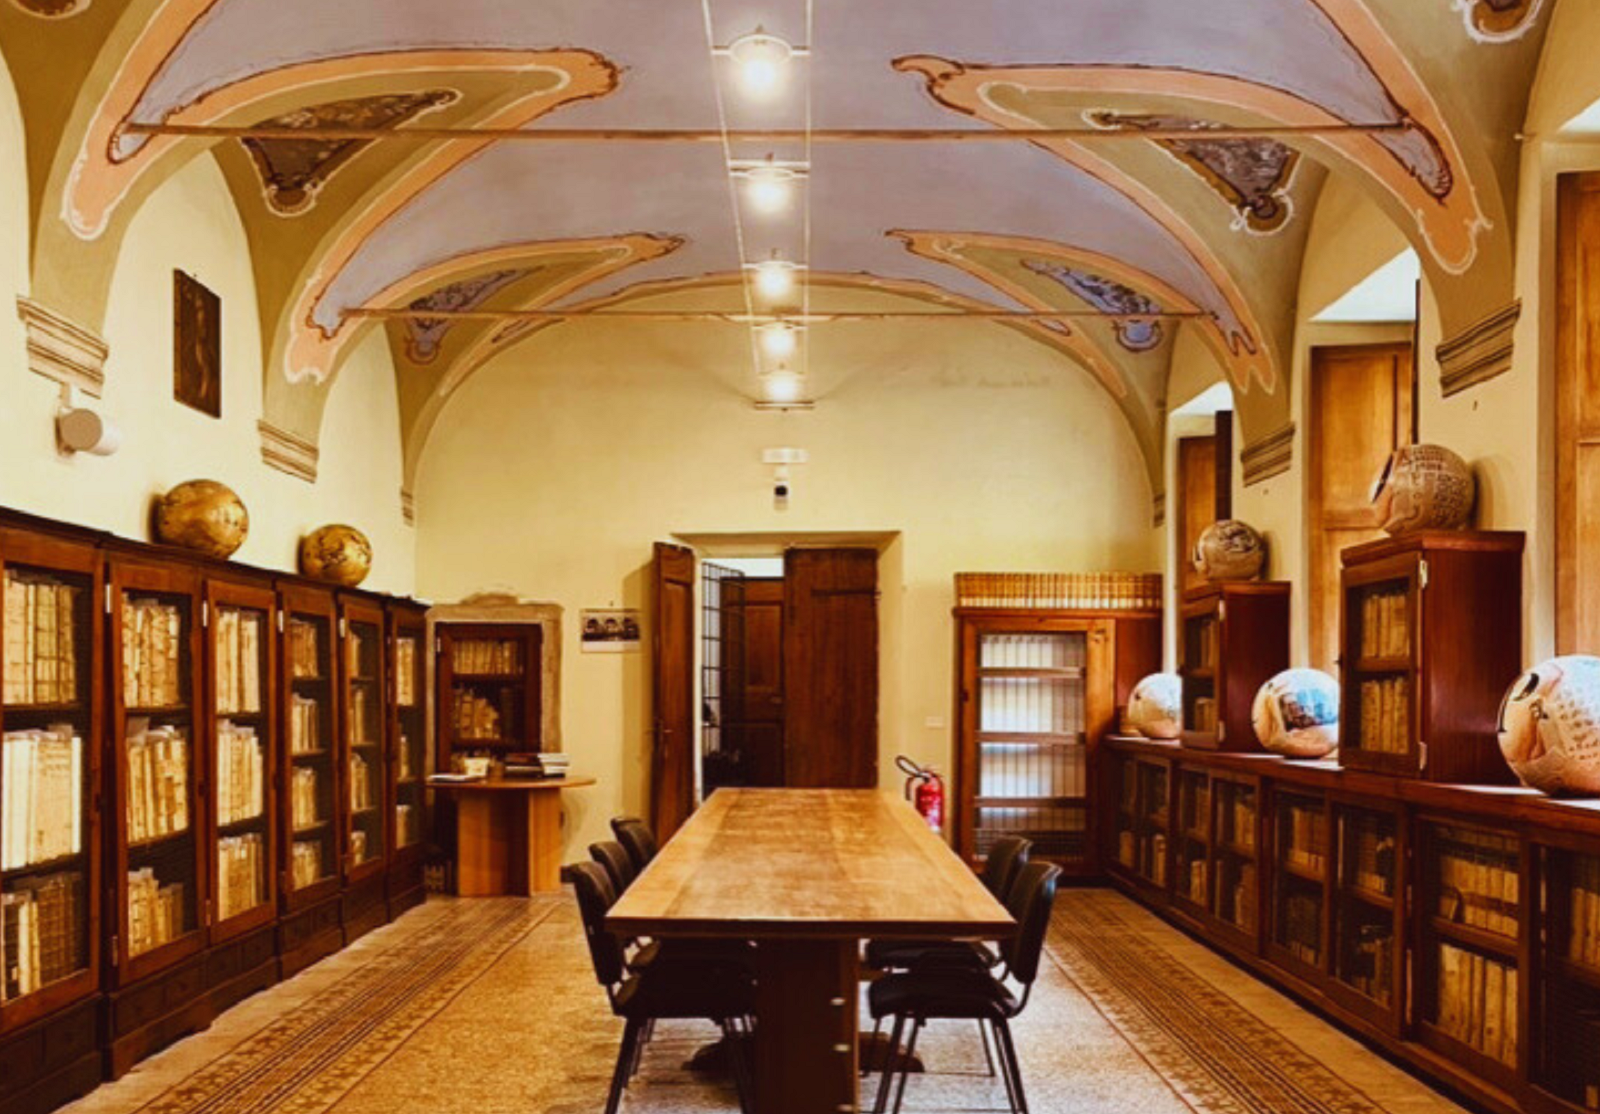 Interior of the library